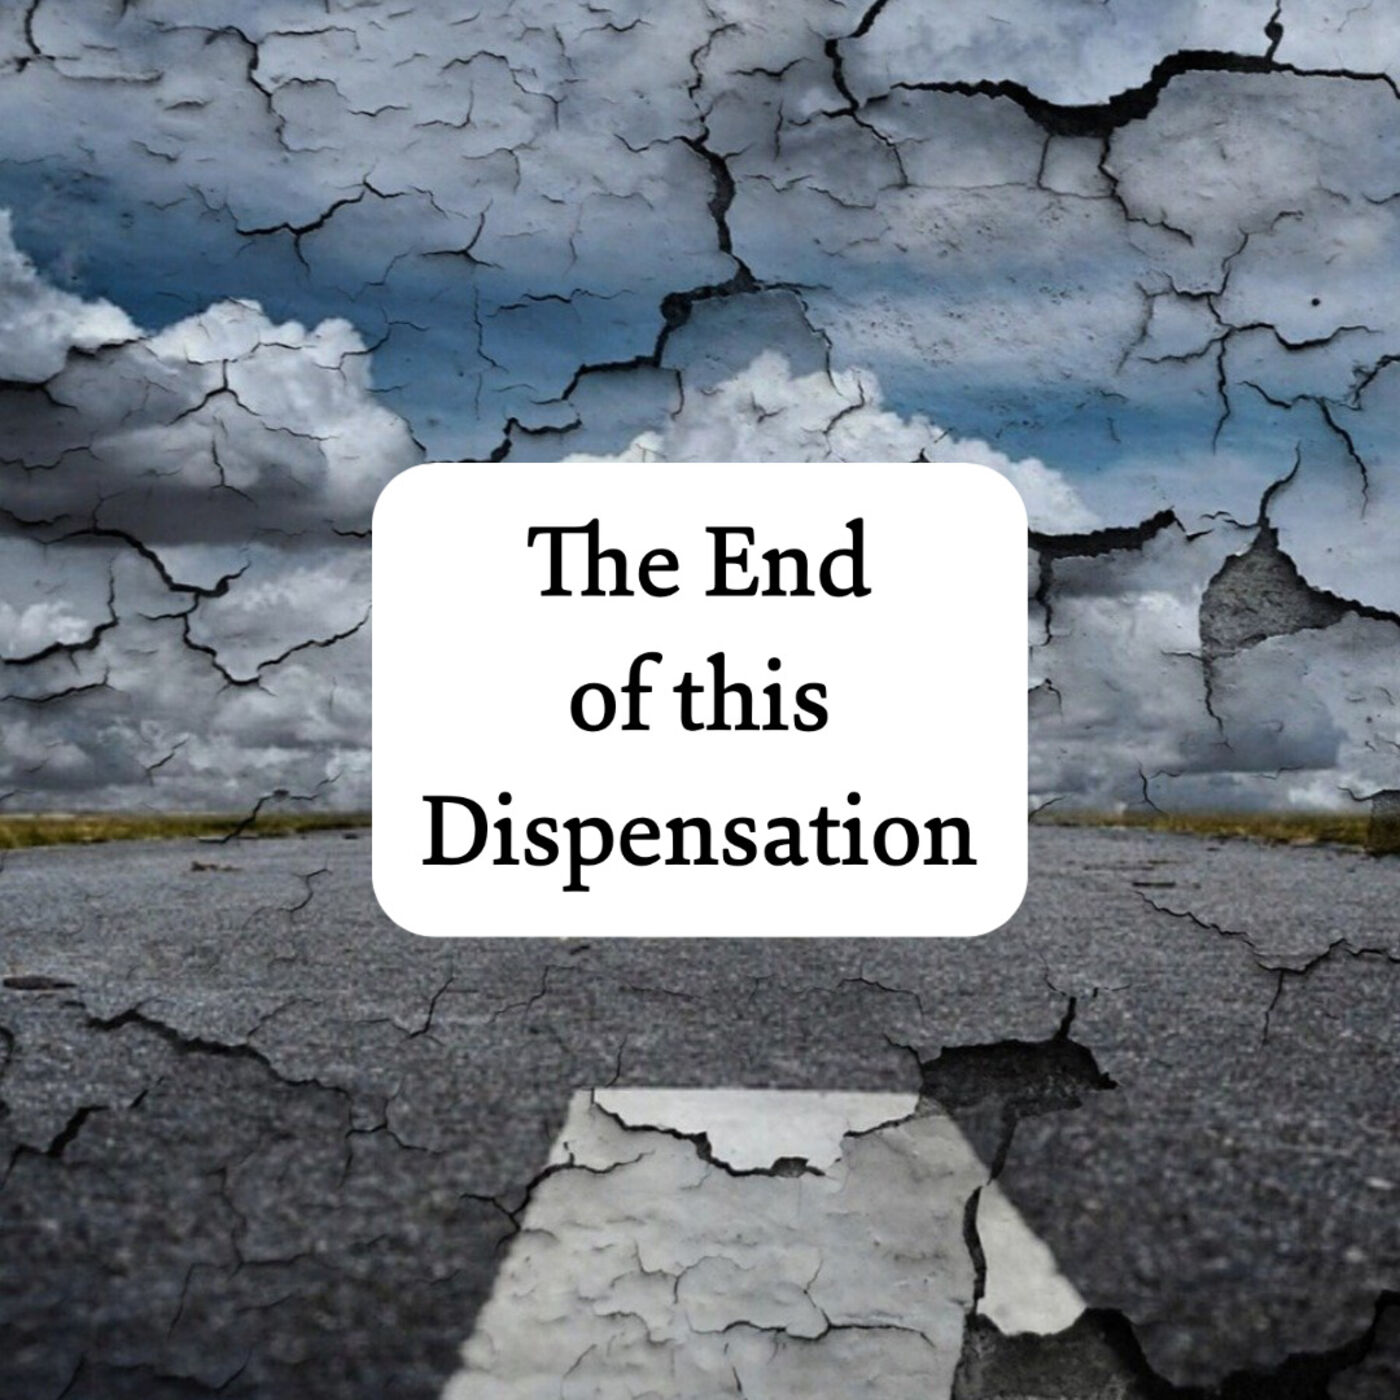 The End of This Dispensation